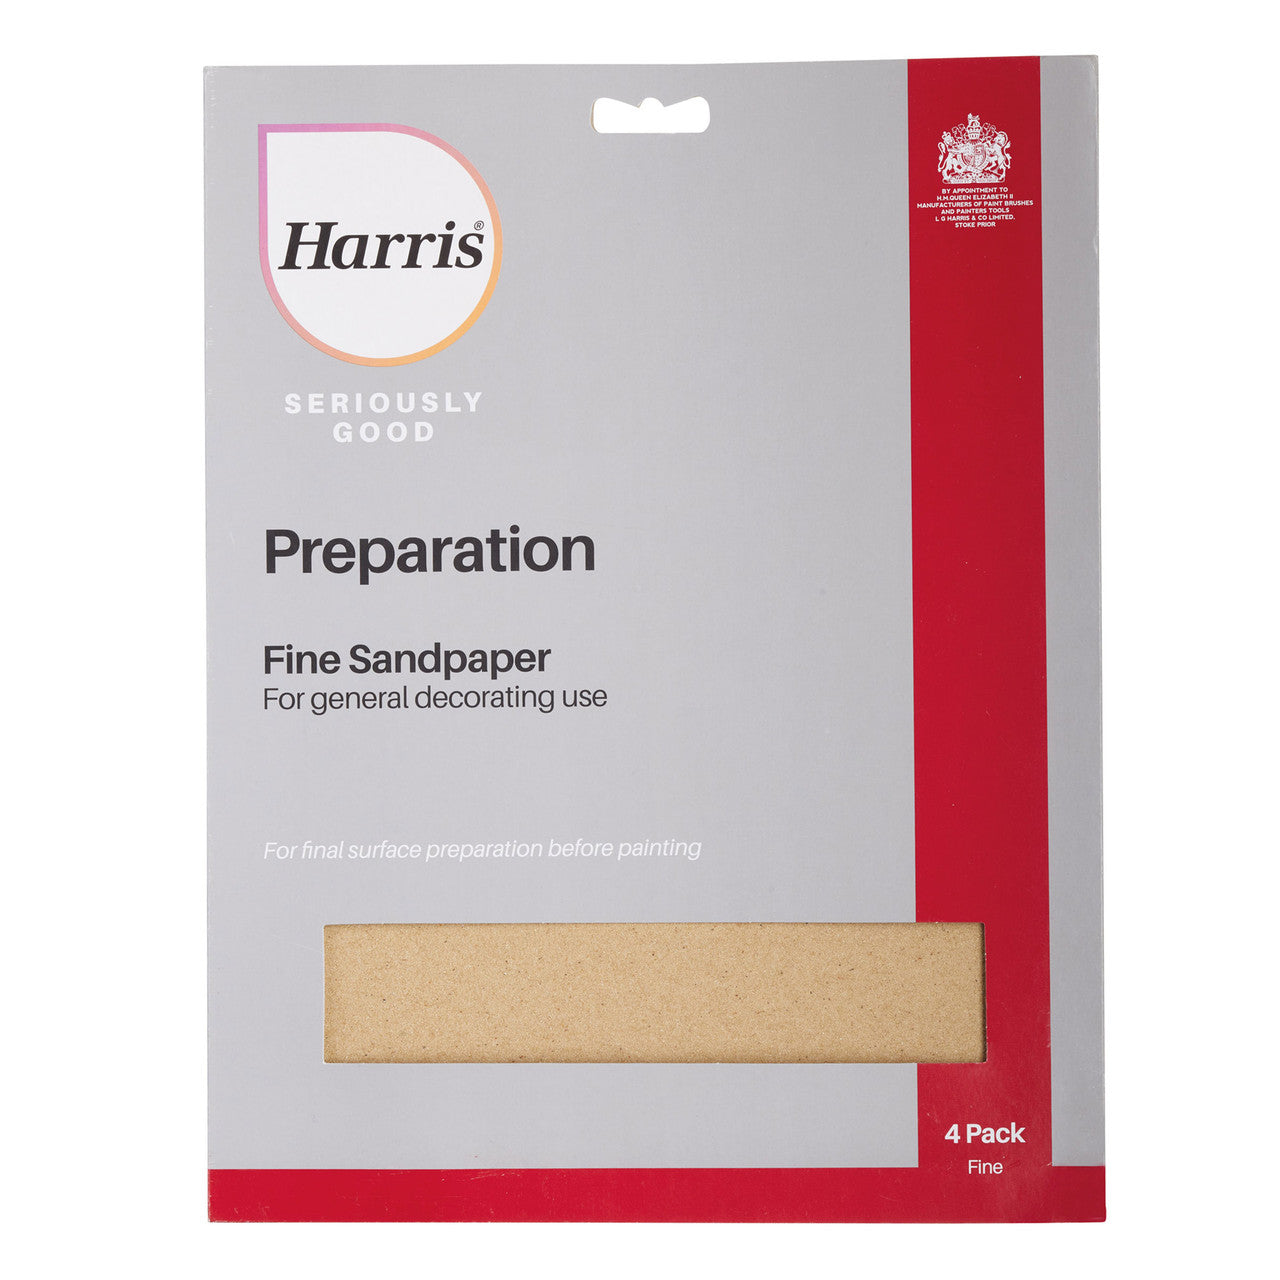 Harris 102064318 Seriously Good Sandpaper Fine Pack of 4